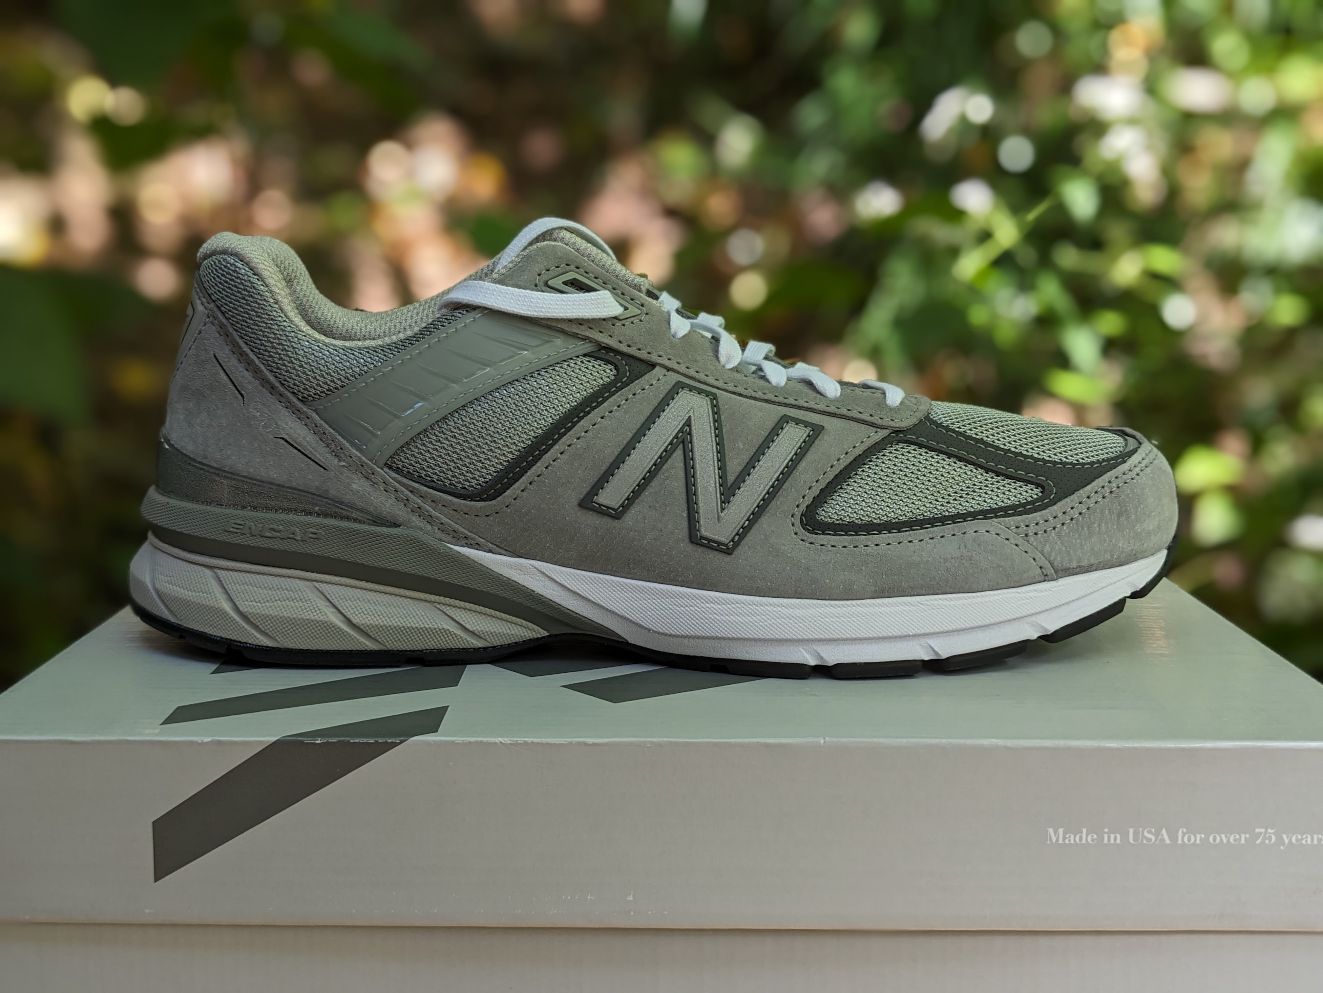 New Balance 990v5: The Ultimate Dad Shoe